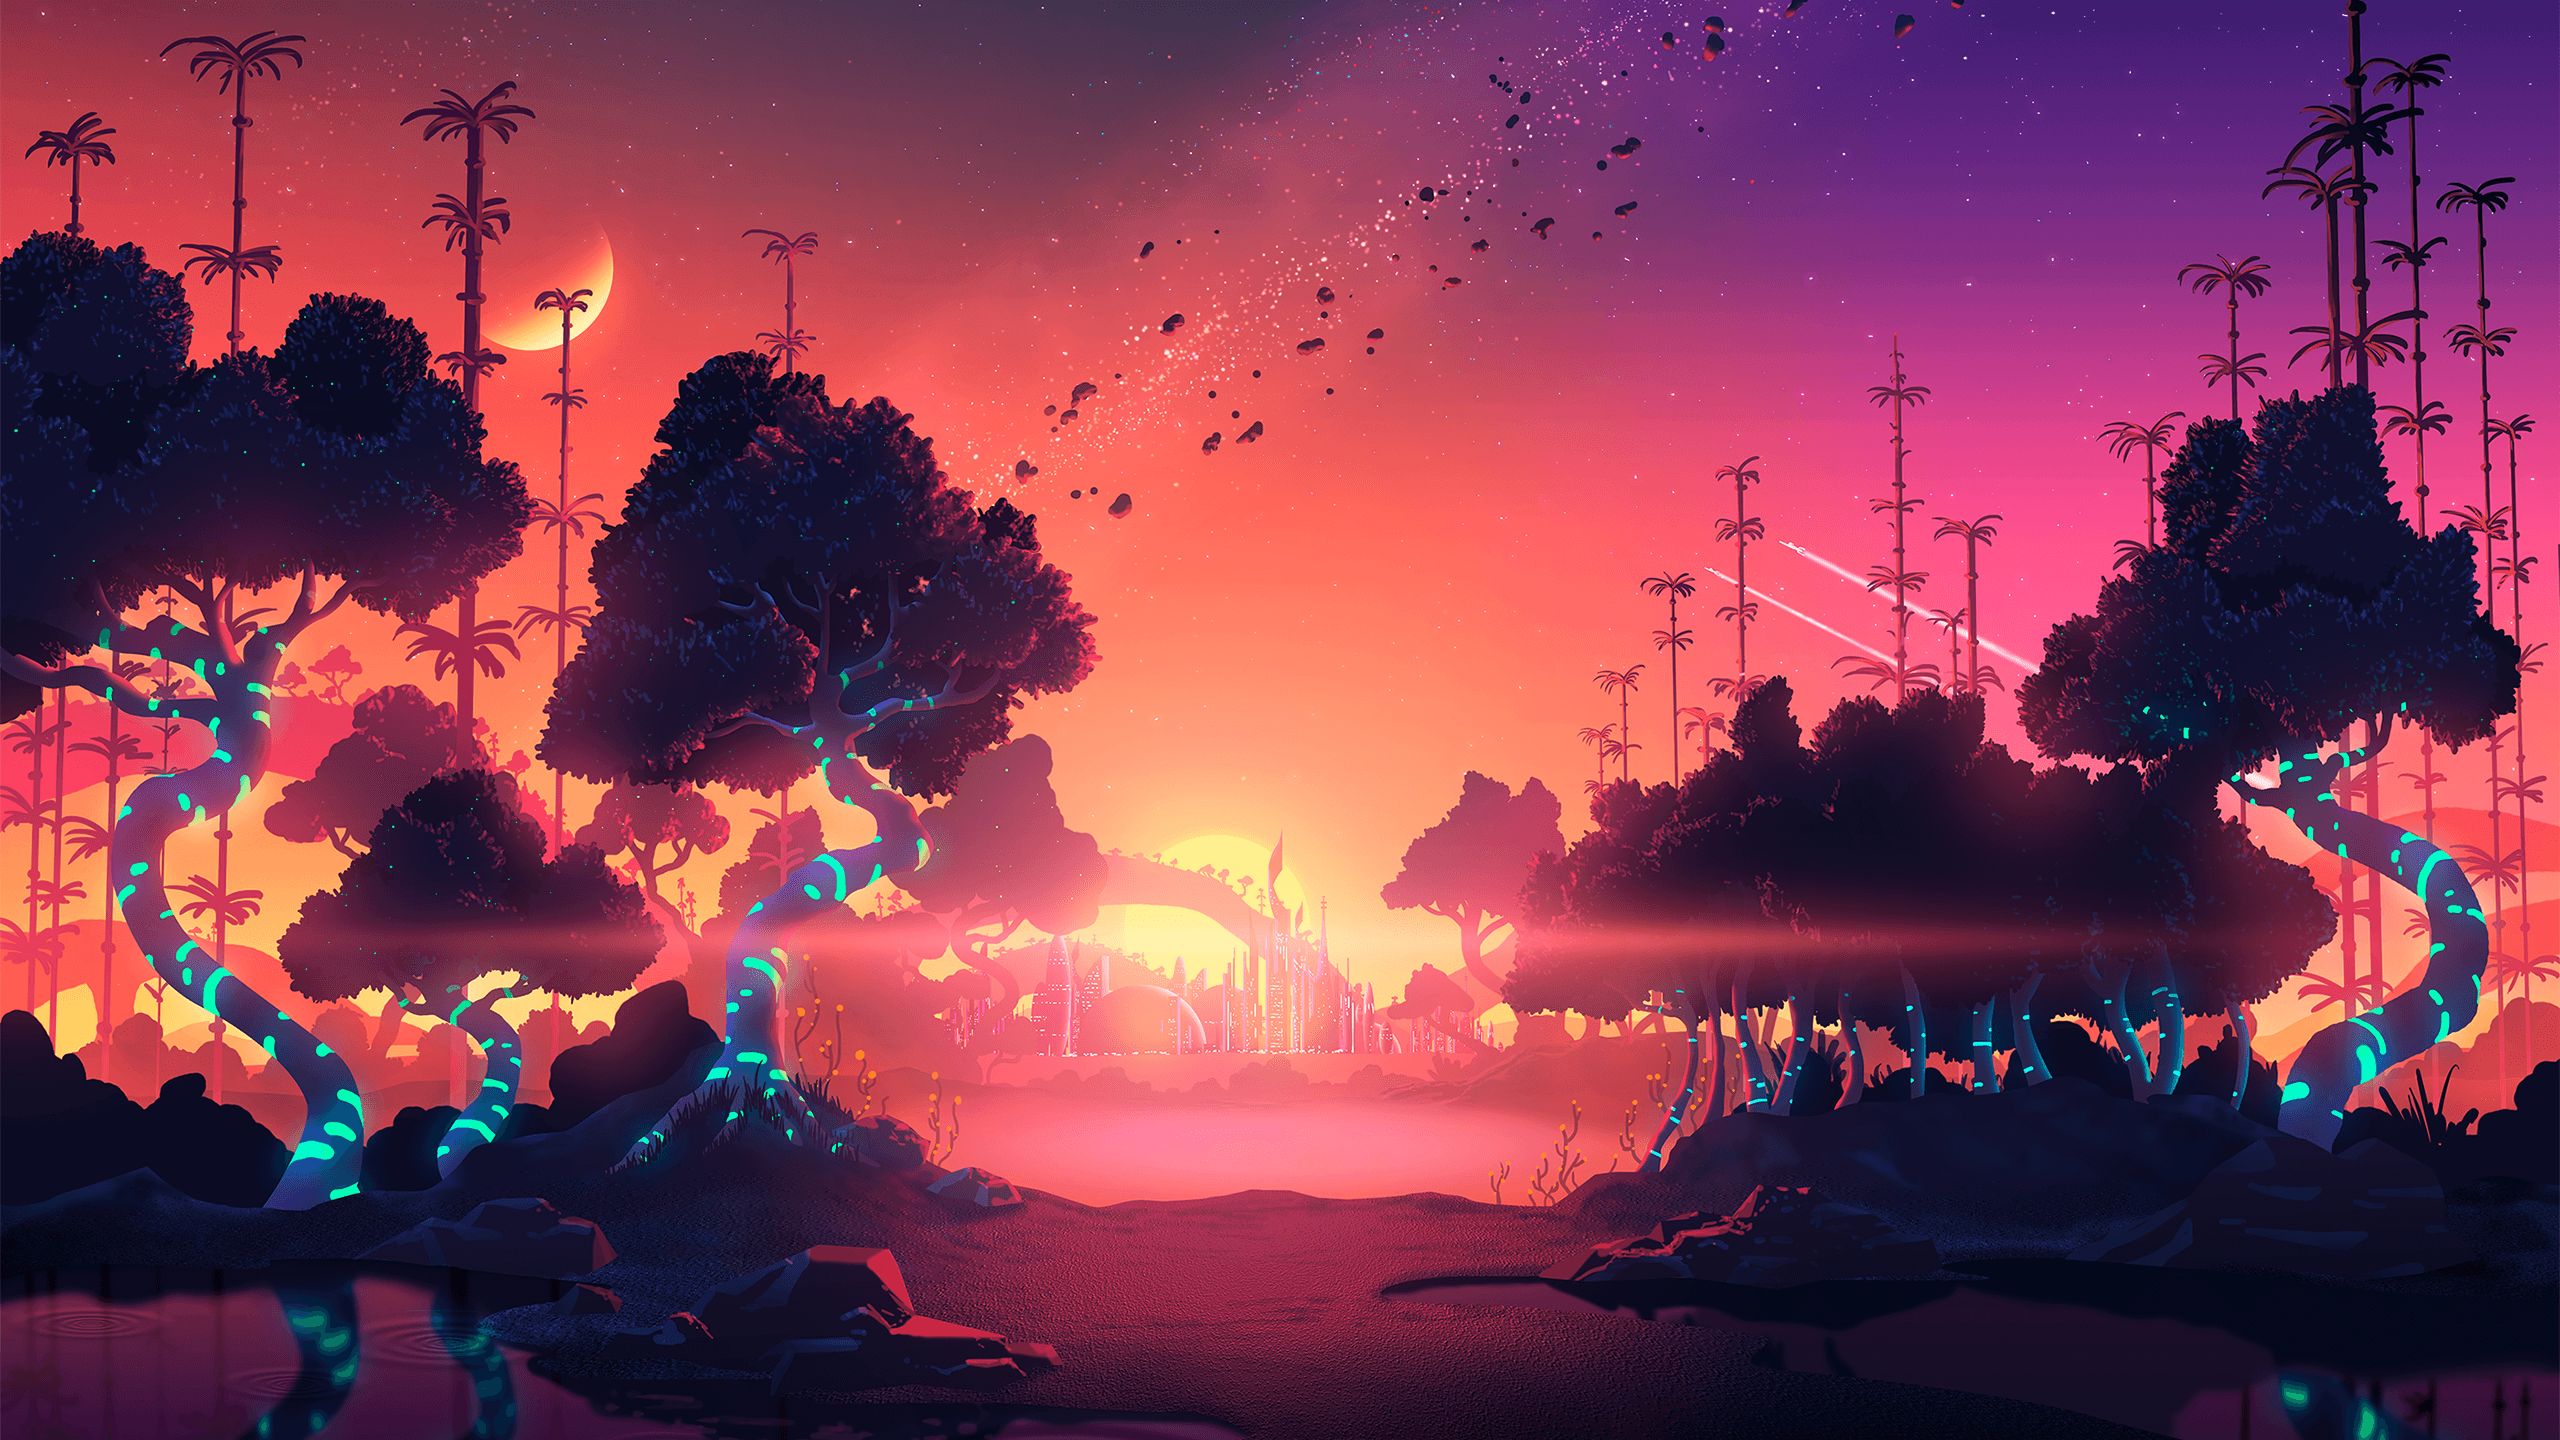 Trillectro (Aaron Campbell) [2560x1440]